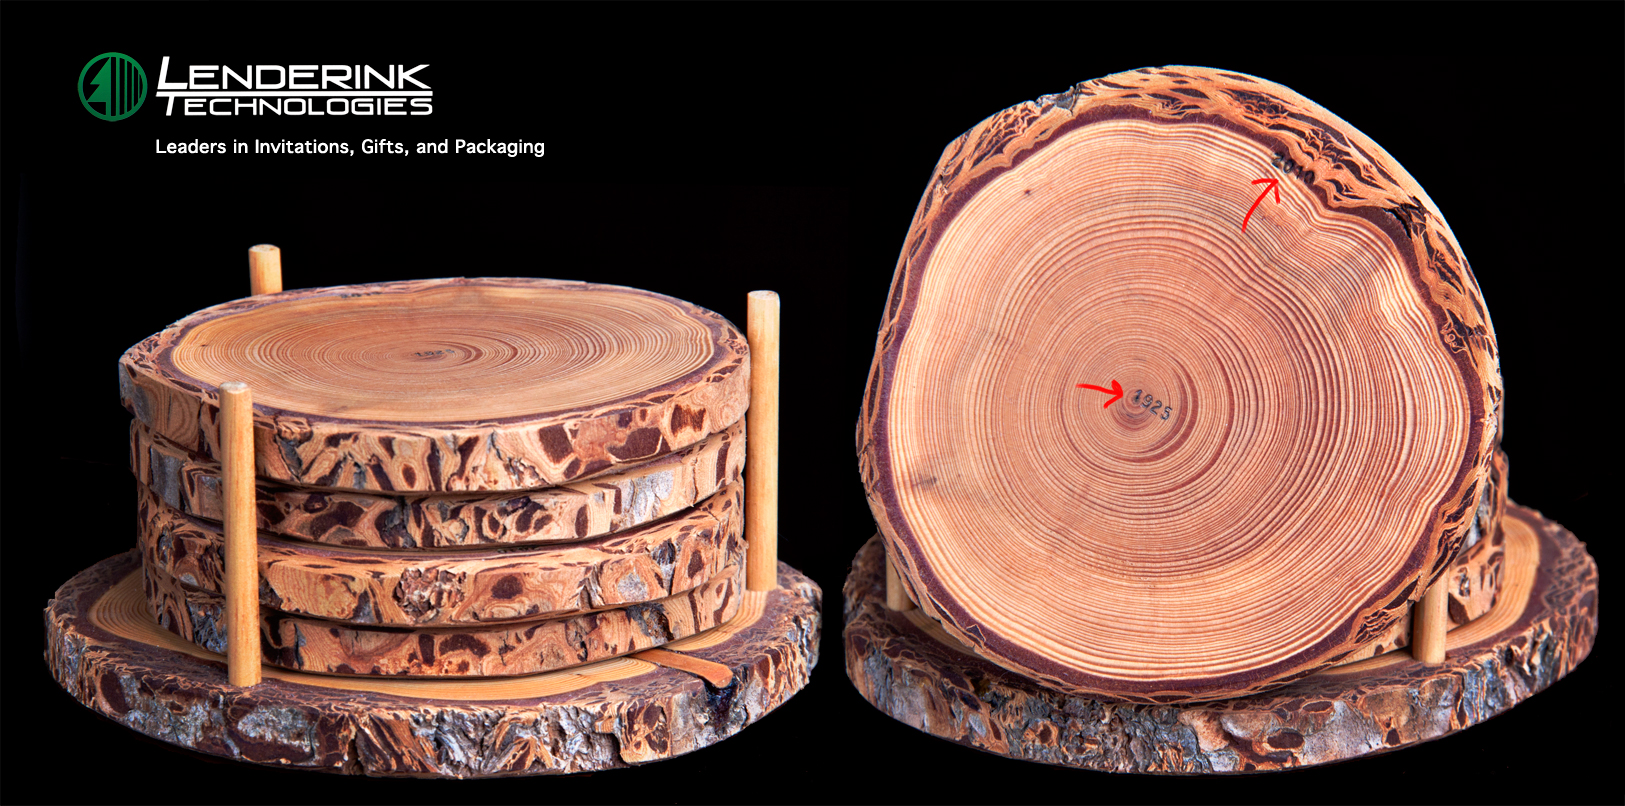 One Of A Kind Tree Ring Desk Coasters Gifts And Packaging